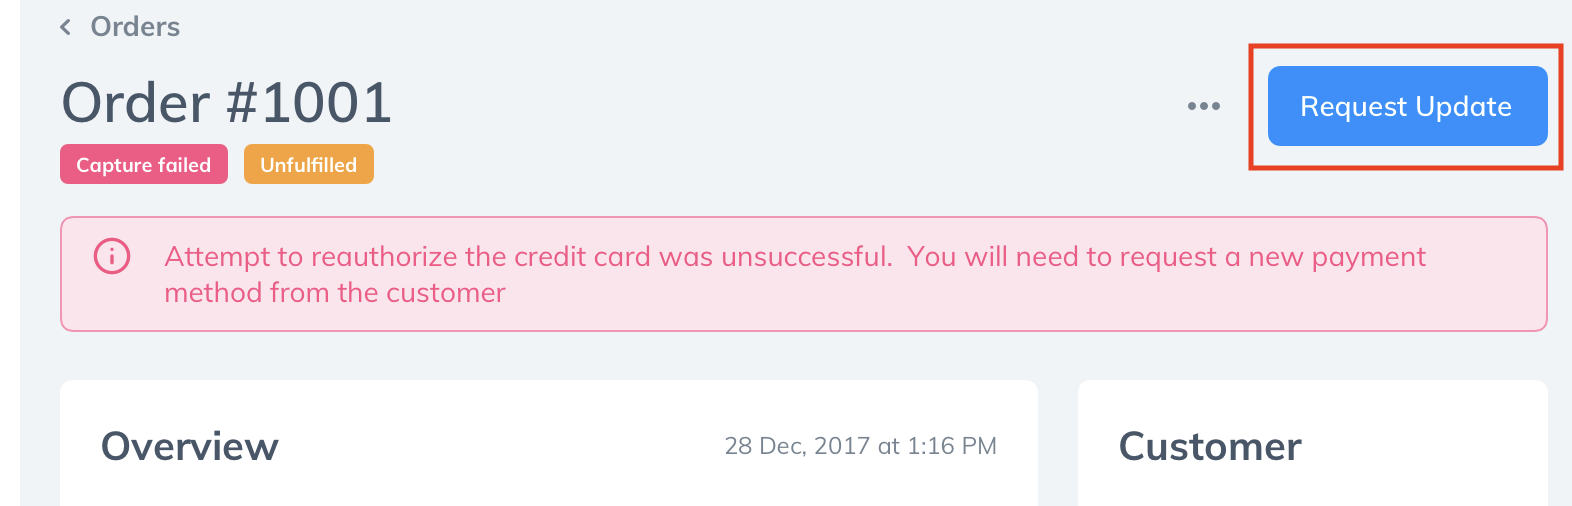 payment-request-update.png